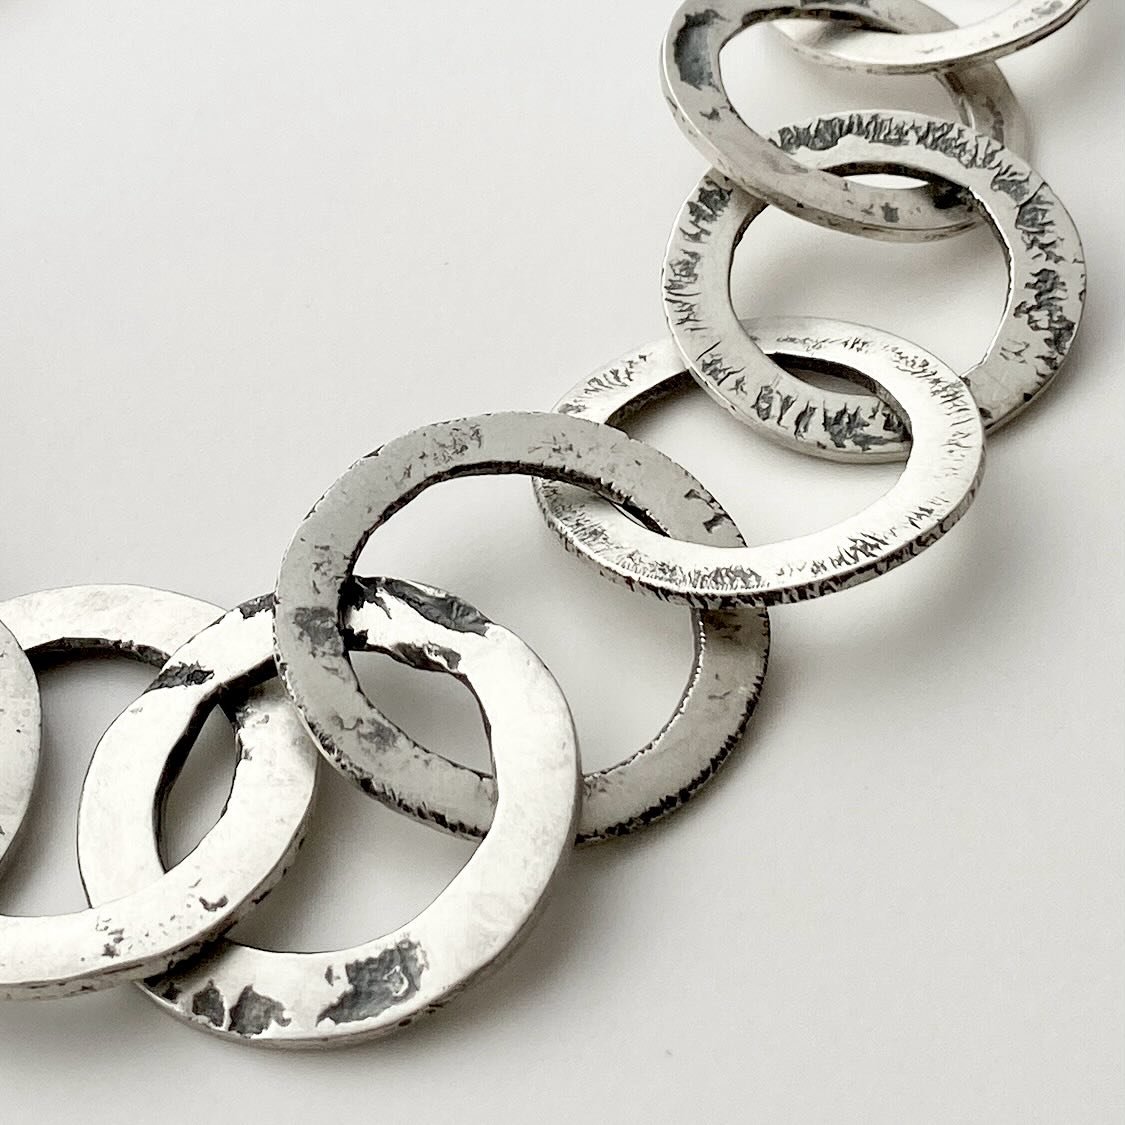 Eroded Washer Necklace, inspired by the rusty steel objects I&rsquo;ve been collecting as I walk around London.
Each &lsquo;washer&rsquo; is made with recycled silver, melted down into a nugget, rolled through the rolling mill, formed into a flat rin